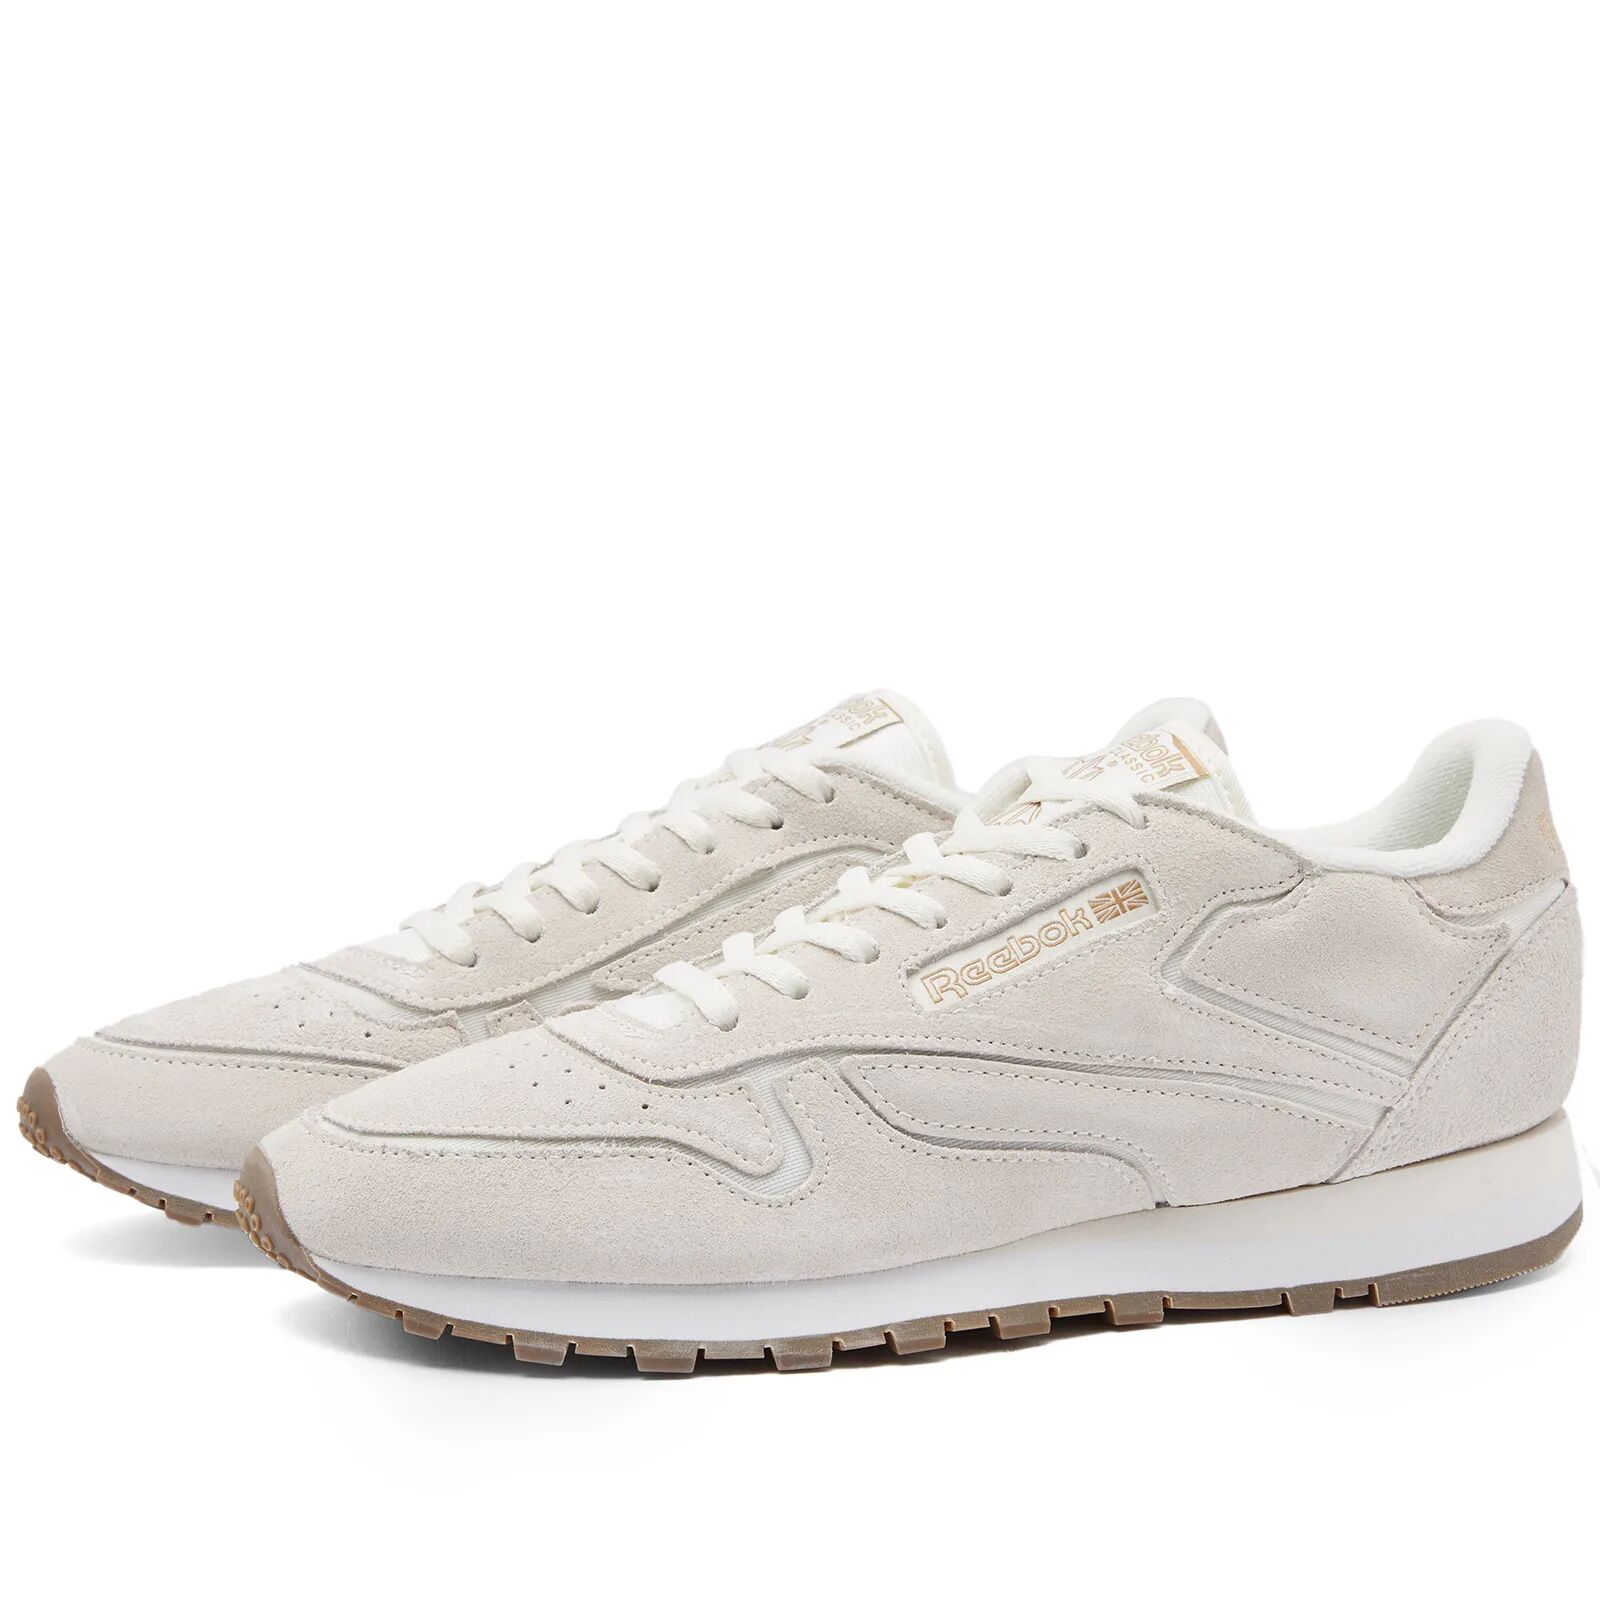 Reebok Women's Classic Leather Sneakers in Chalk/White/Rubber Gum, Size UK 6